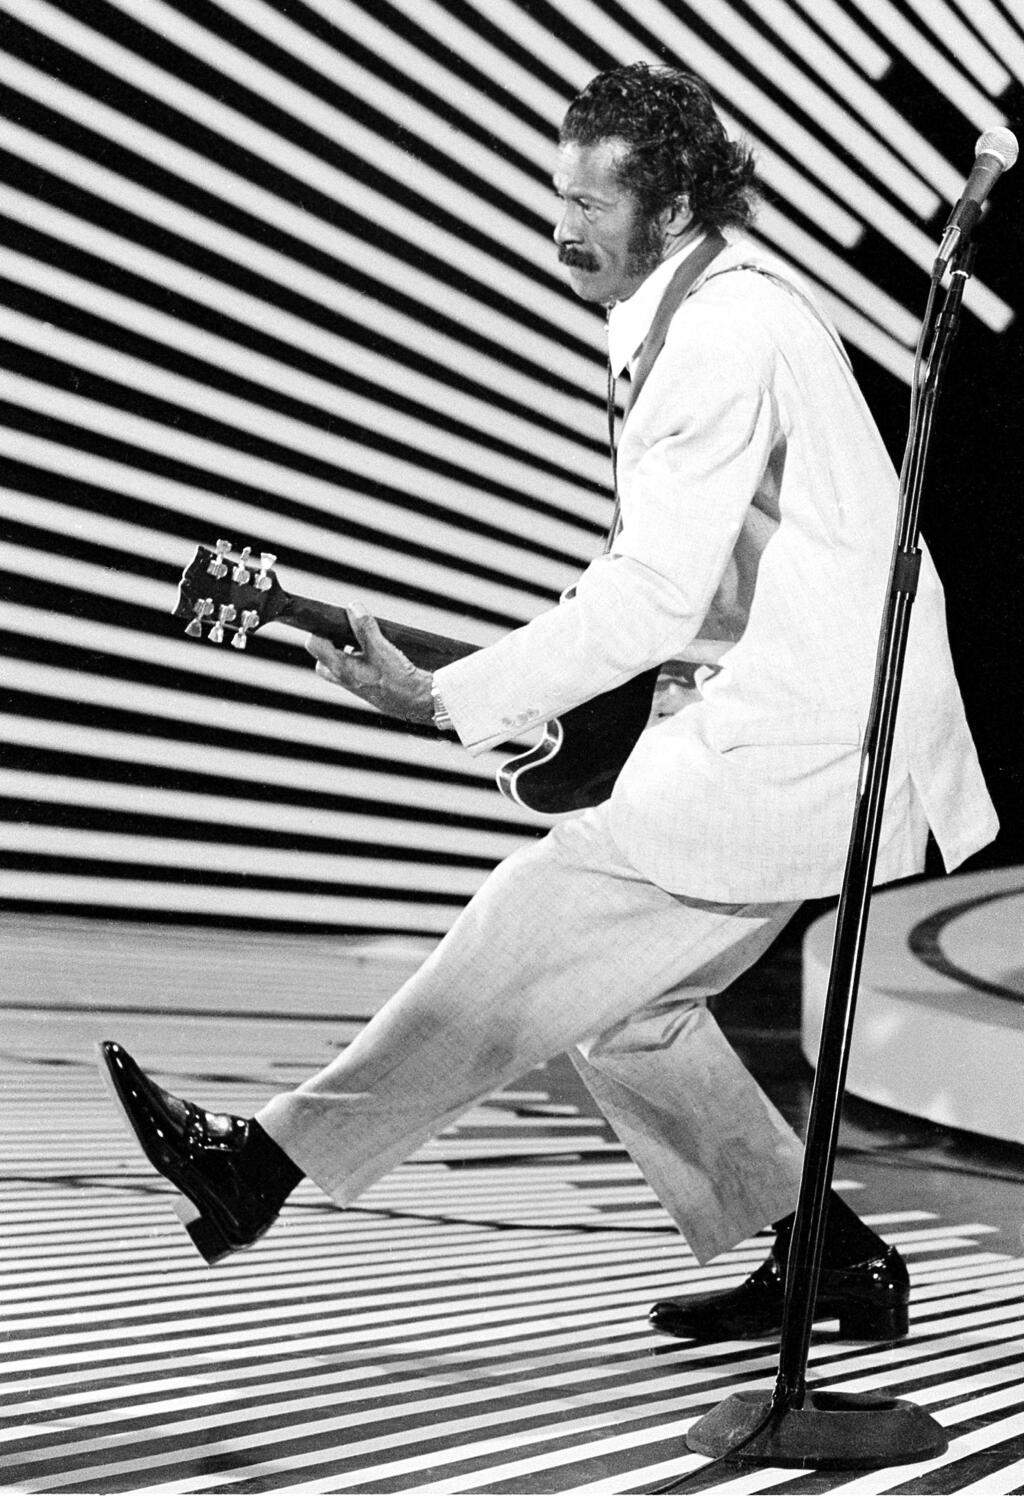 FILE - In this April 4, 1980 file photo, guitarist and singer Chuck Berry performs his 'duck walk' as he plays his guitar on stage. On Saturday, March 18, 2017, police in Missouri said Berry has died at the age of 90. (AP Photo)